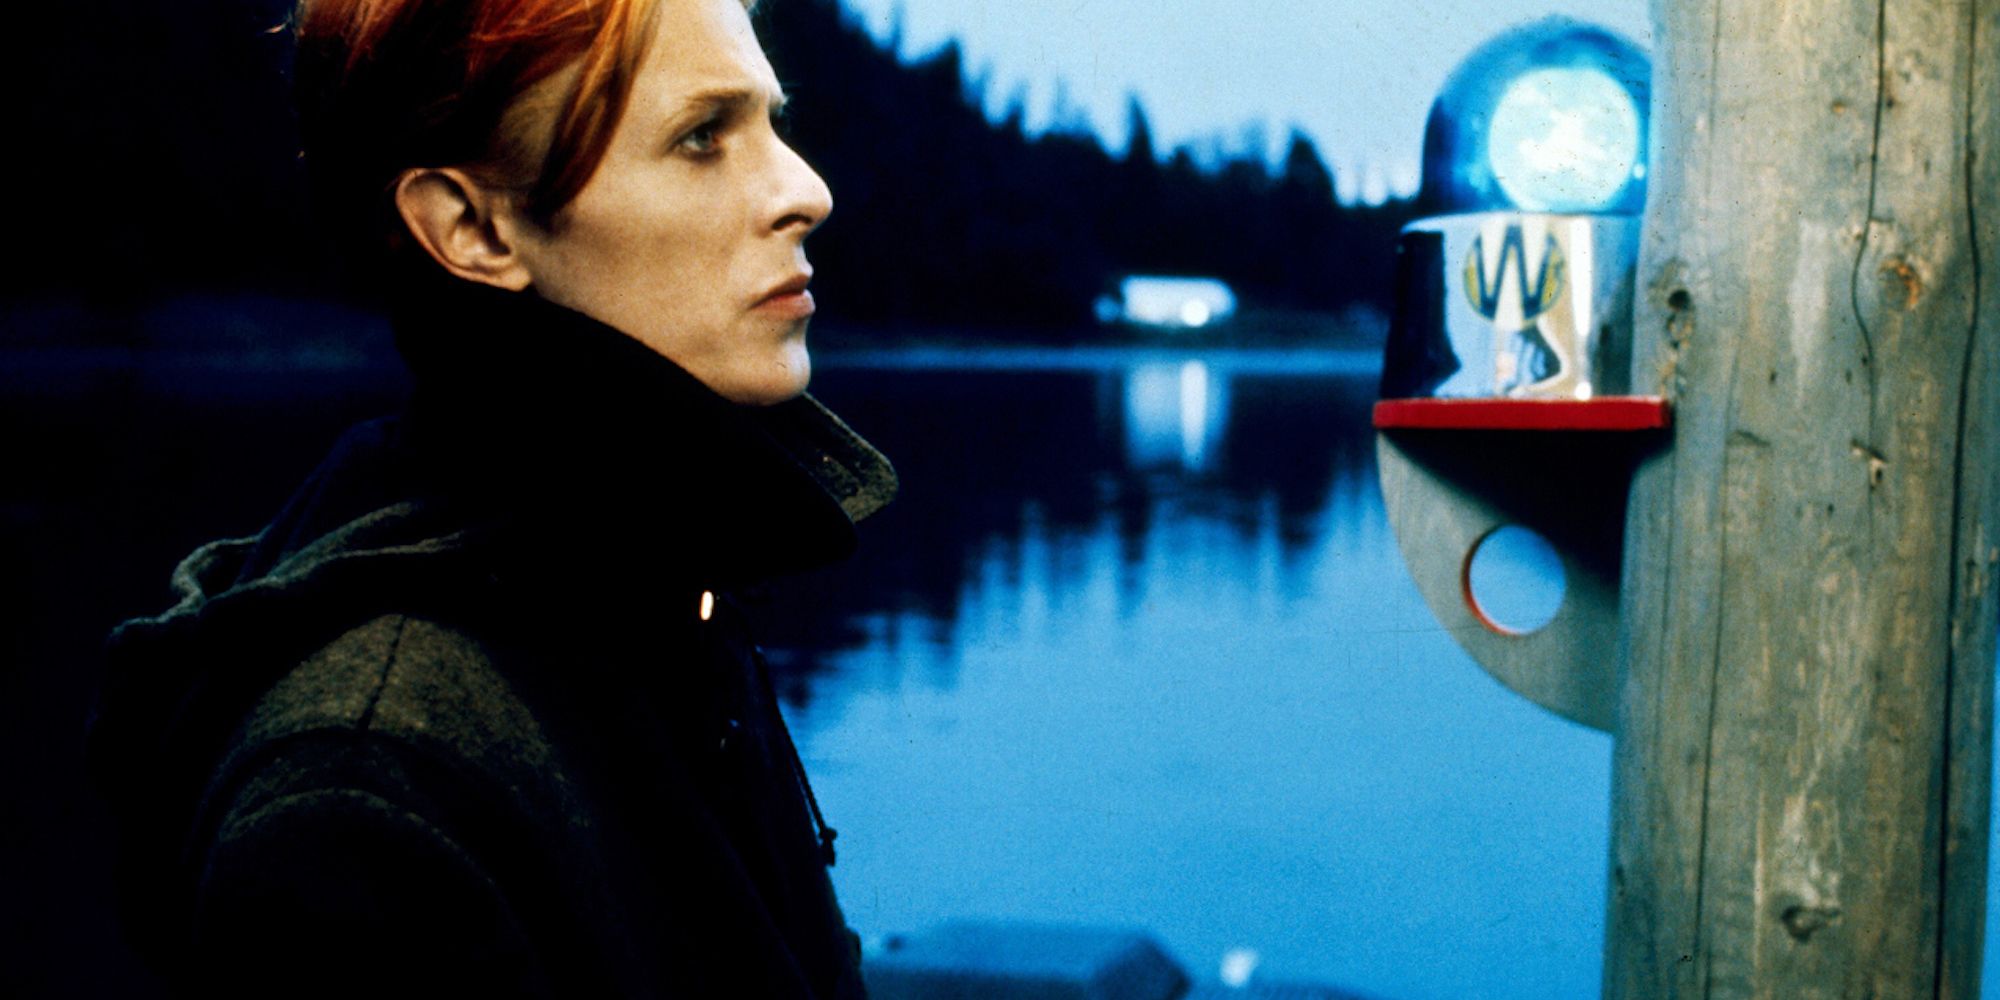 David Bowie looking at a light pole in The Man Who Fell to Earth